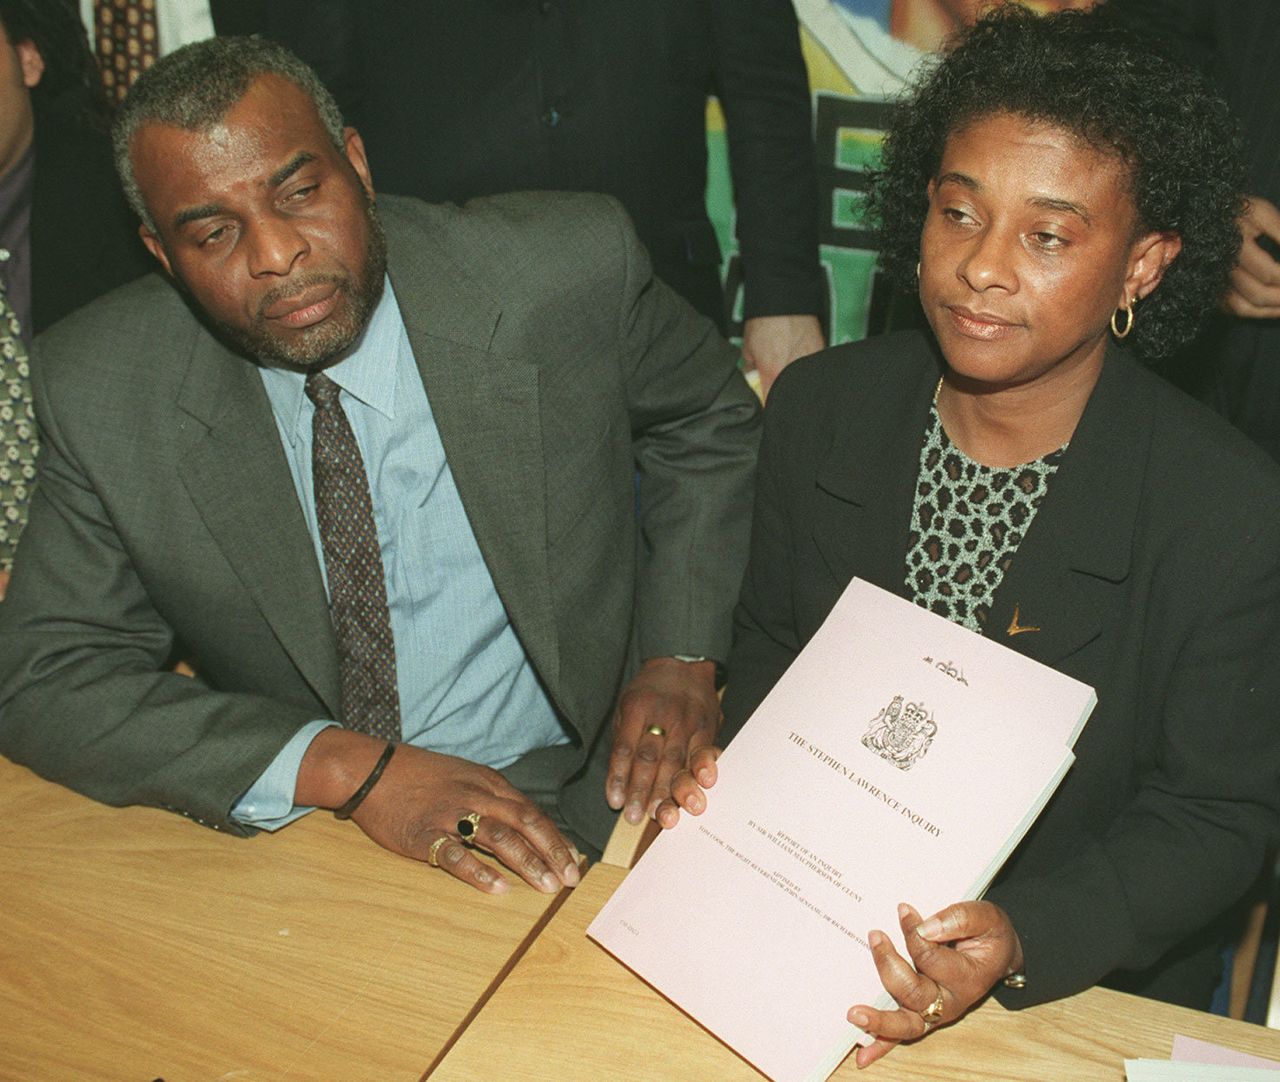 Doreen and Neville Lawrence during a news conference at the Home Office after hearing Home Secretary Jack Straw reveal the outcome of the judicial inquiry into their son's death